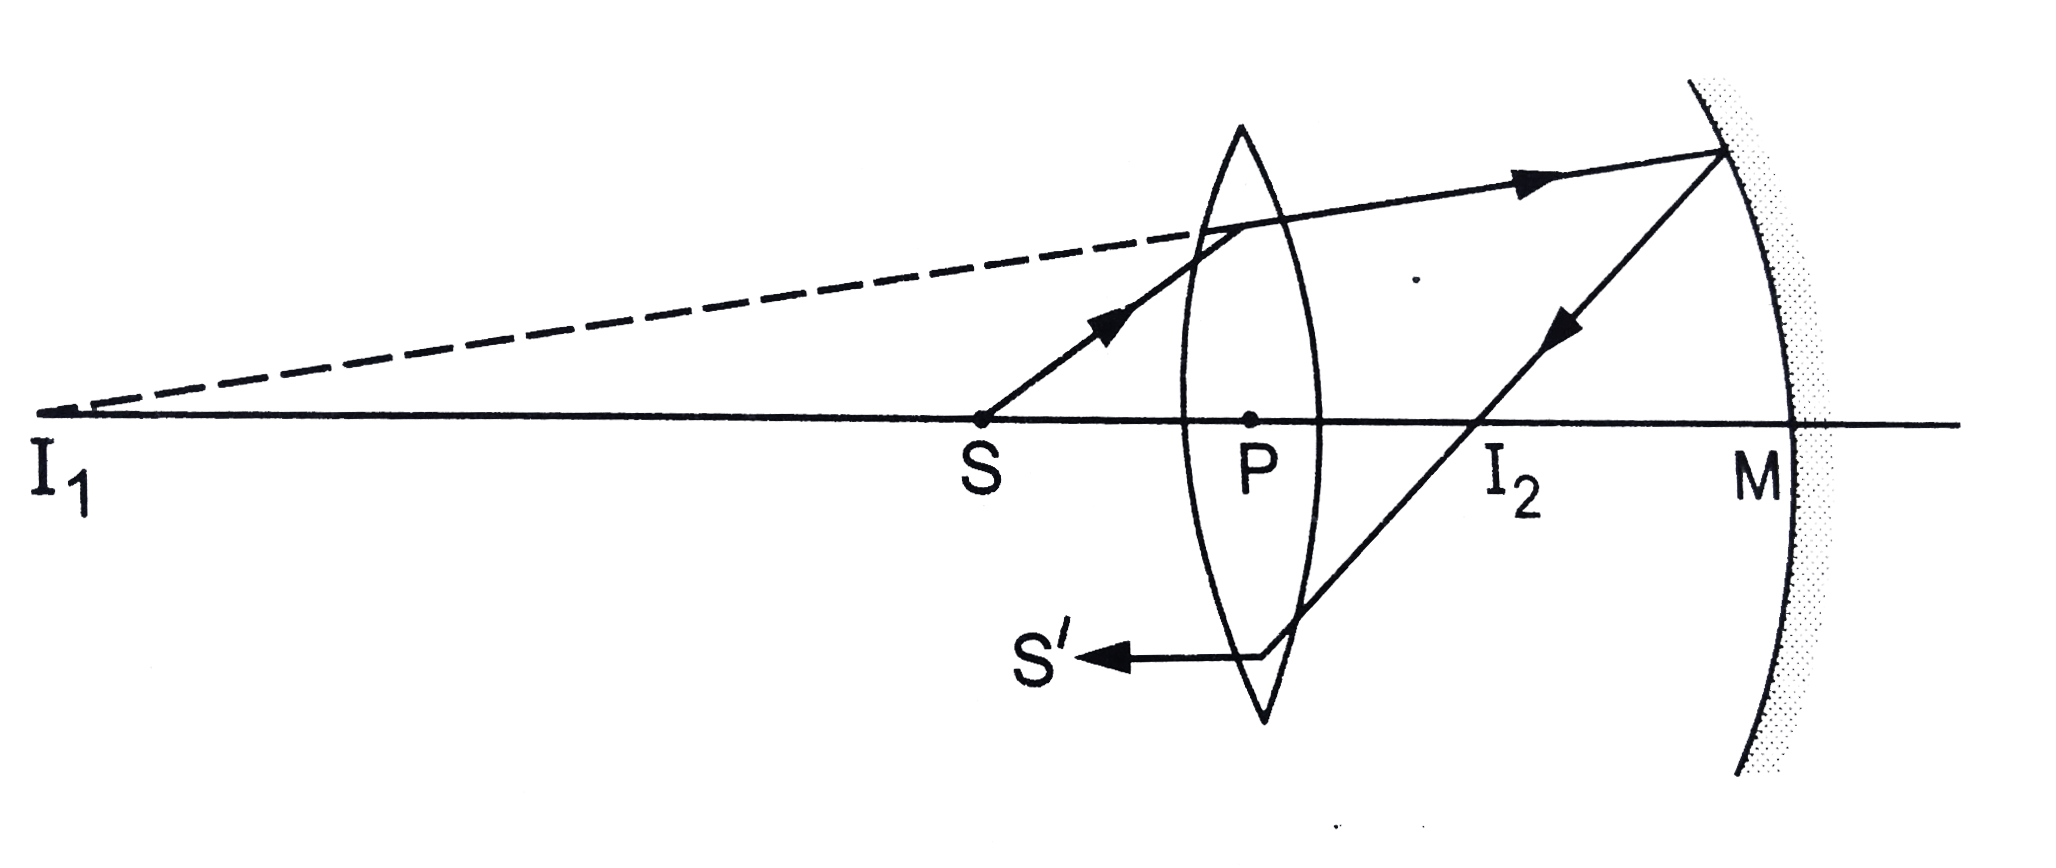 A converging lens of focal length 15 cm and a converging mirror of focal length 20 cm are placed with their principal axes coinciding. A point source S is placed on the principal axis at a distance of 12 cm from the lens as shown in figure. It is found that the final beam comes out parallel to the principal axis. Find the separation between the mirror and the lens.